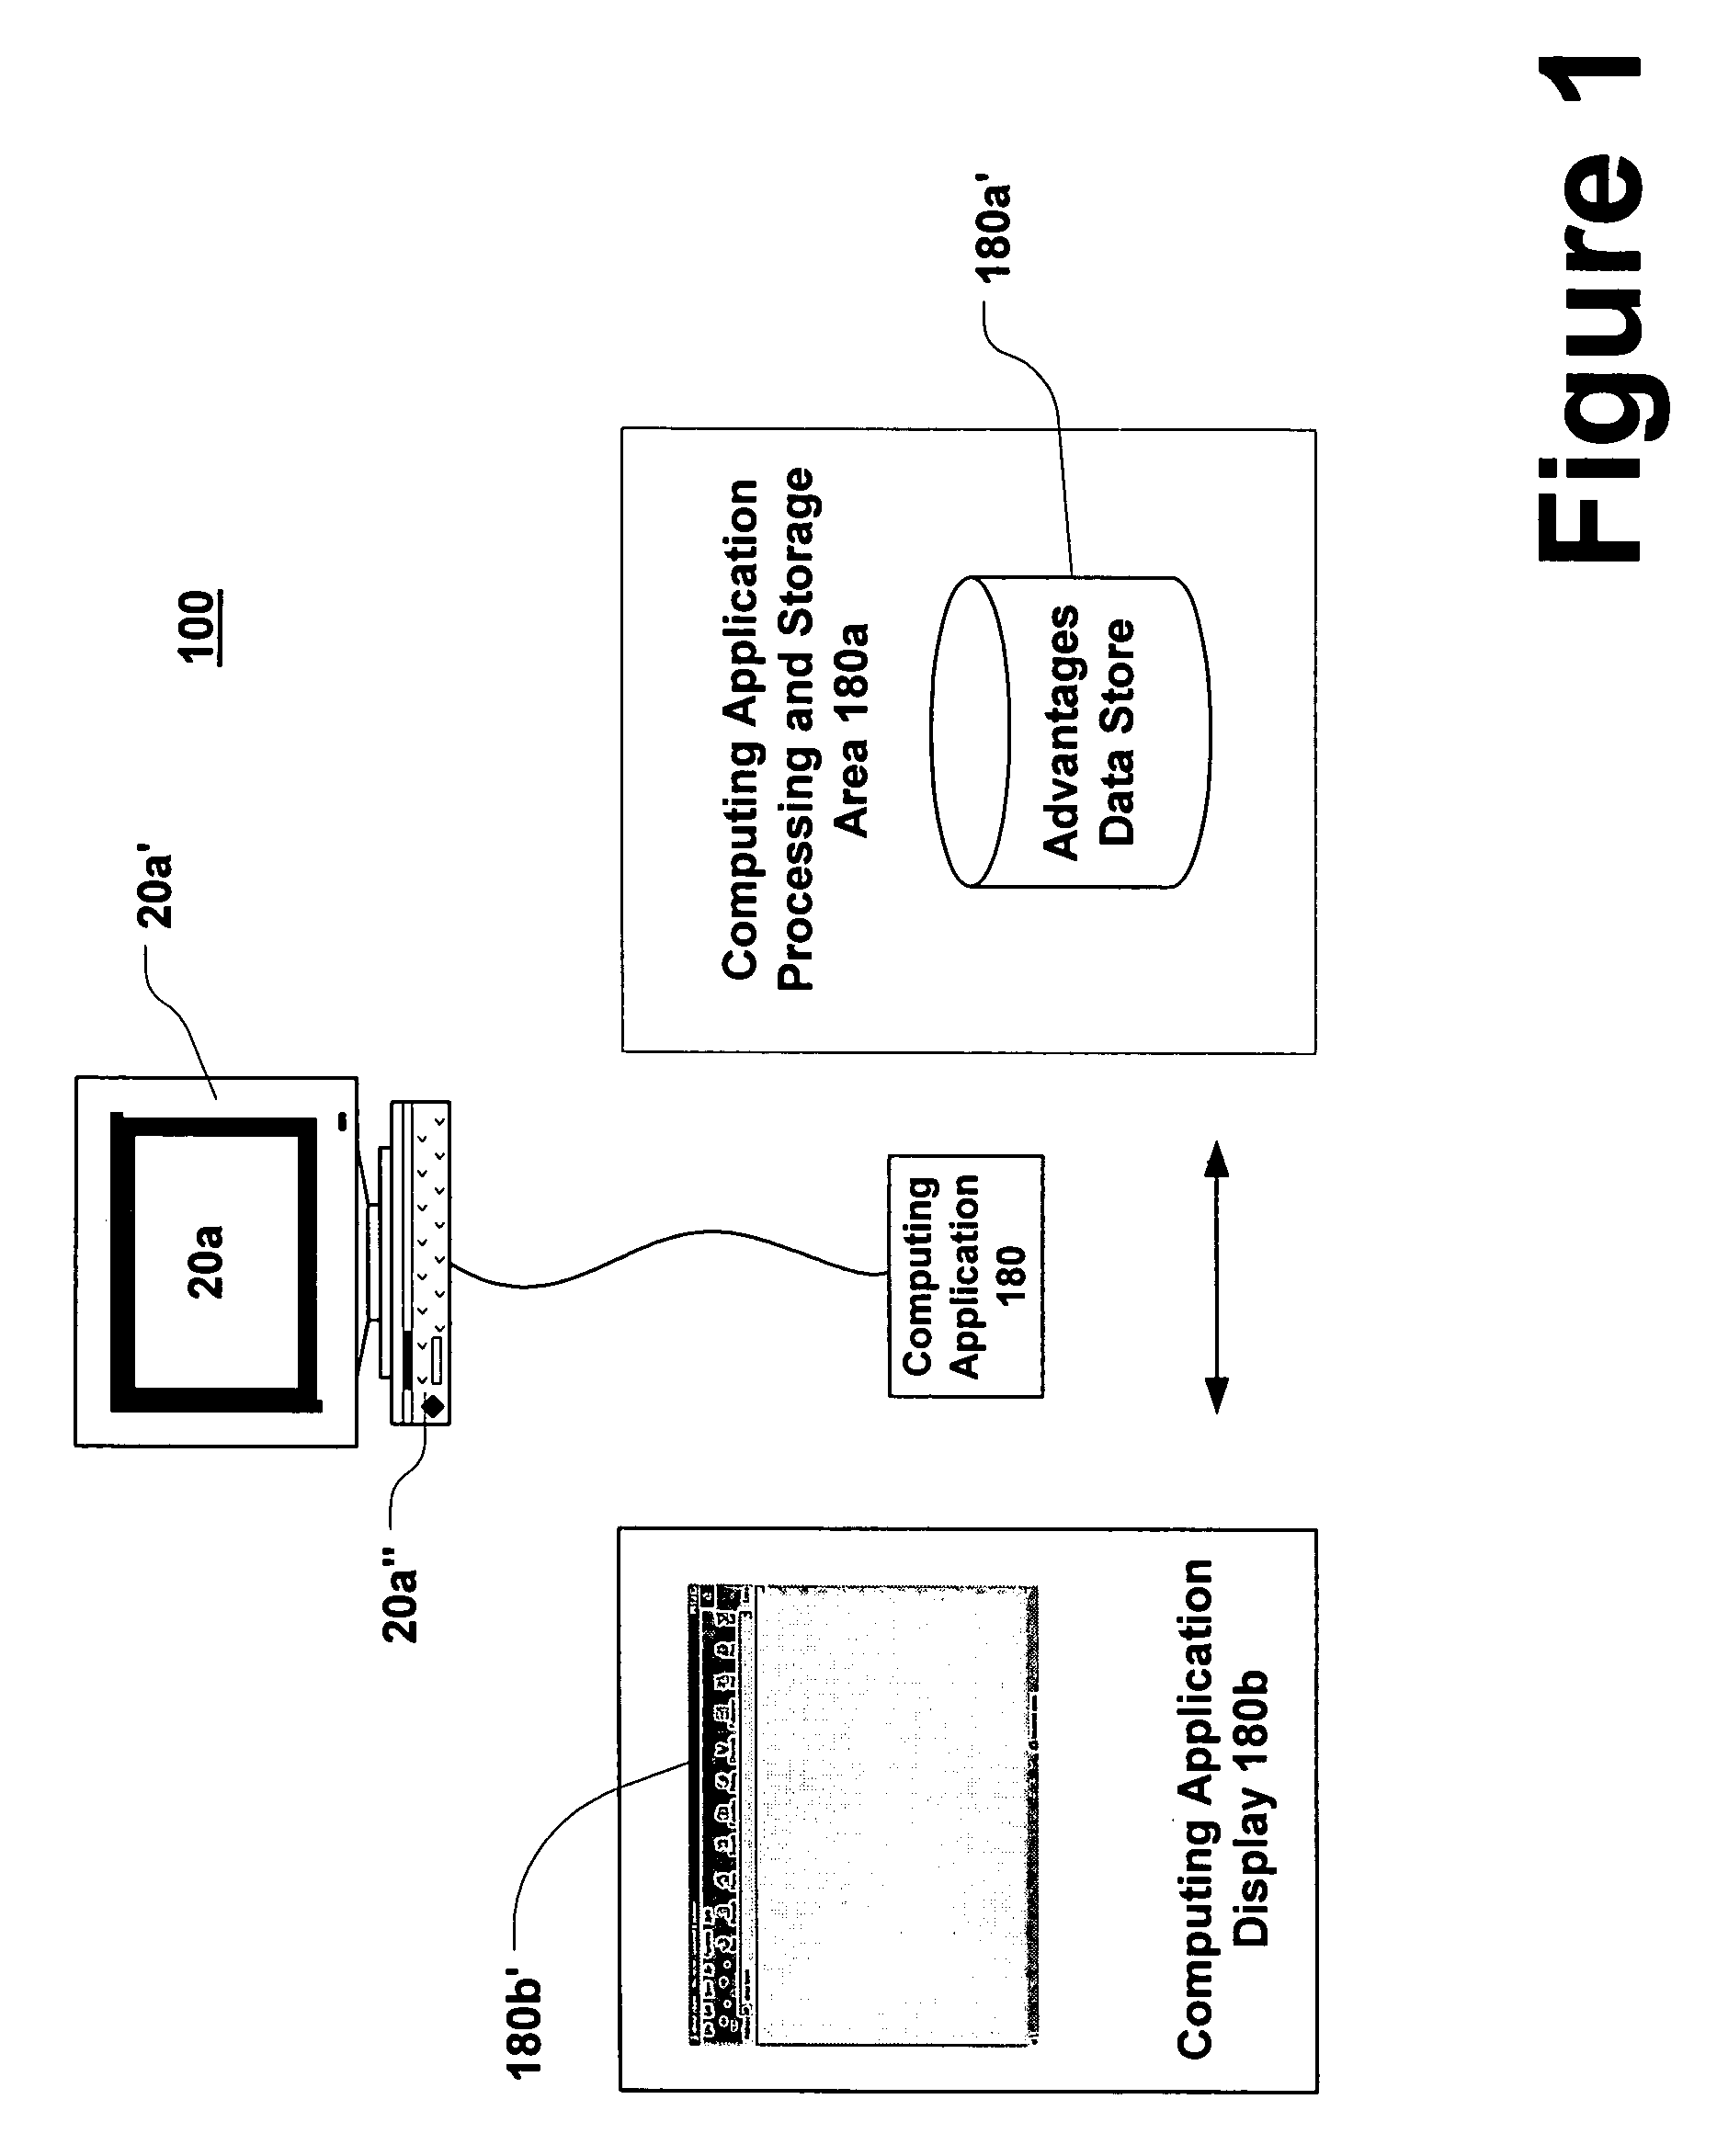 System and methods for obtaining advantages and transacting the same in a computer gaming environment